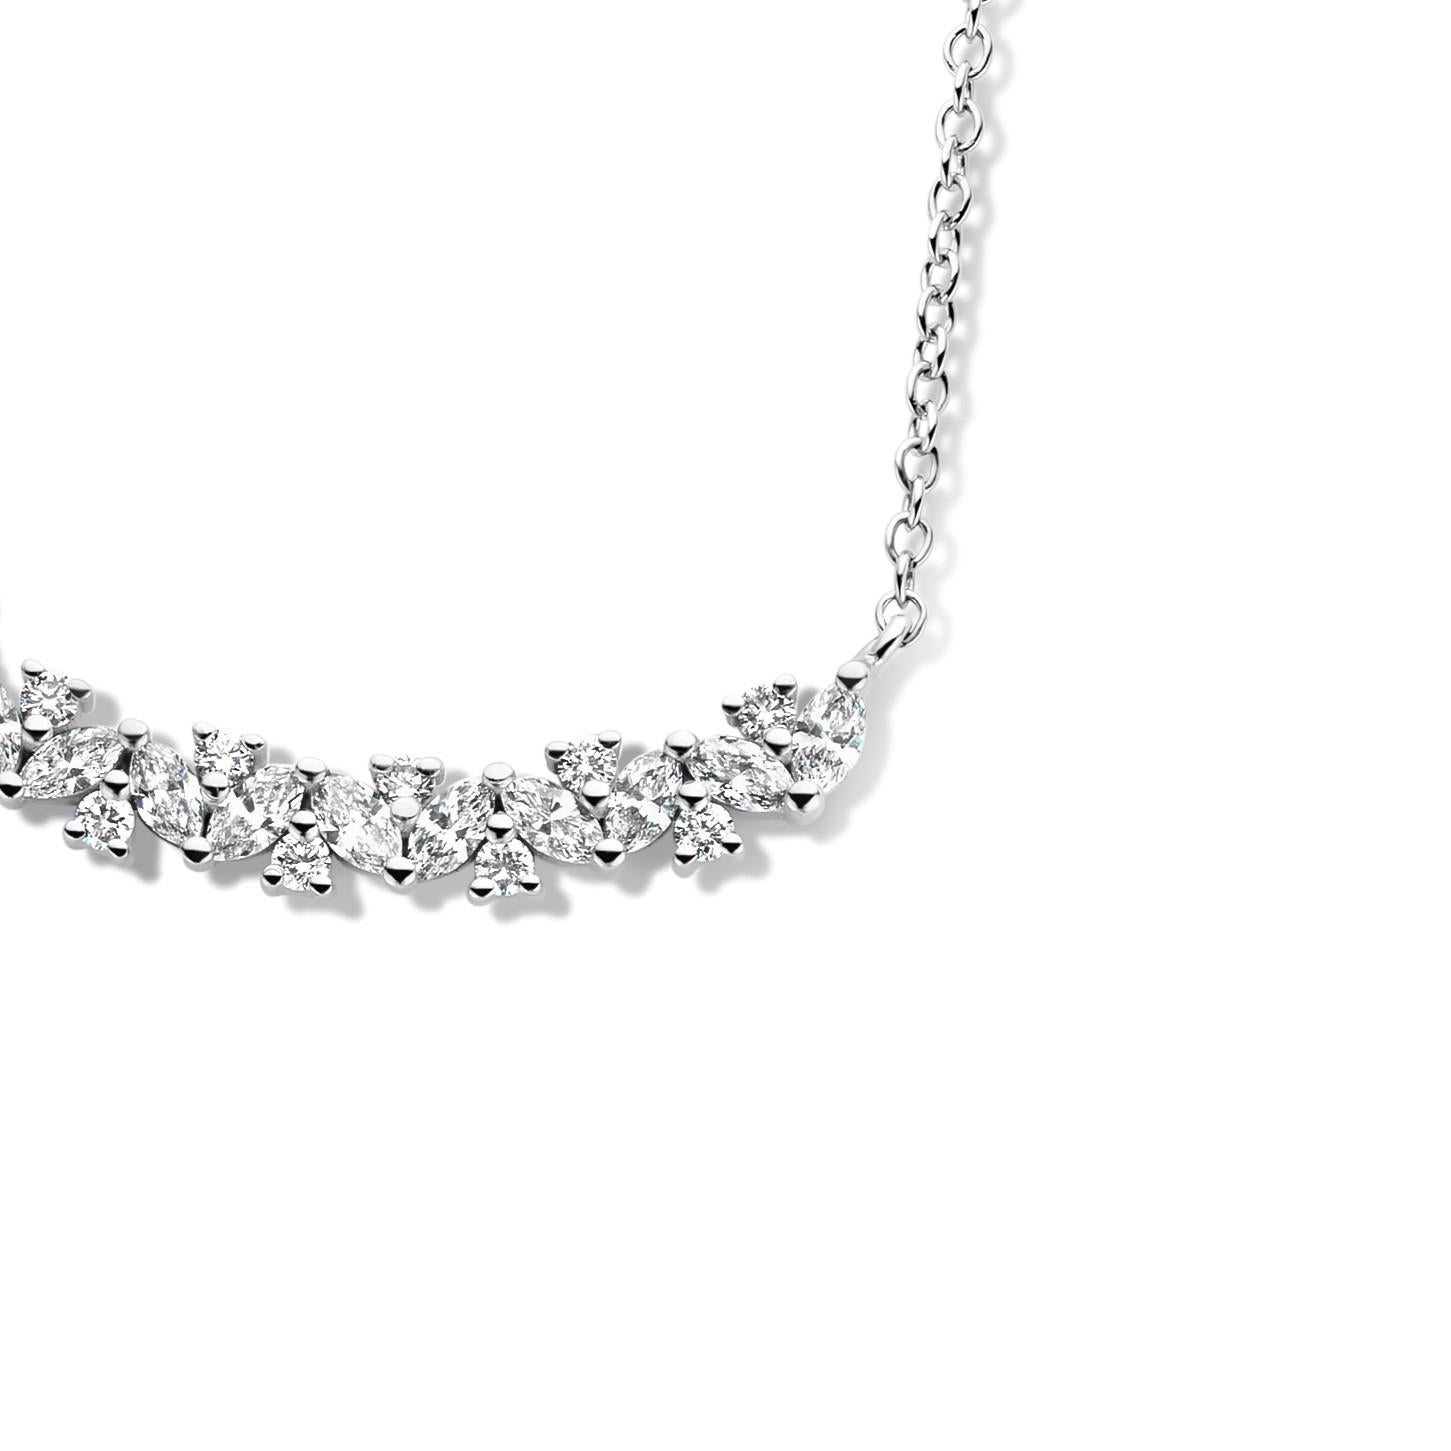 18K yellow gold necklace has a rolo chain and is set with the finest diamonds in F/G-VS quality.  In this necklace, you have 10 marquise diamonds and 9 brilliant cut diamonds. Also, available in 18K white gold and 18K yellow gold.

The 18K yellow